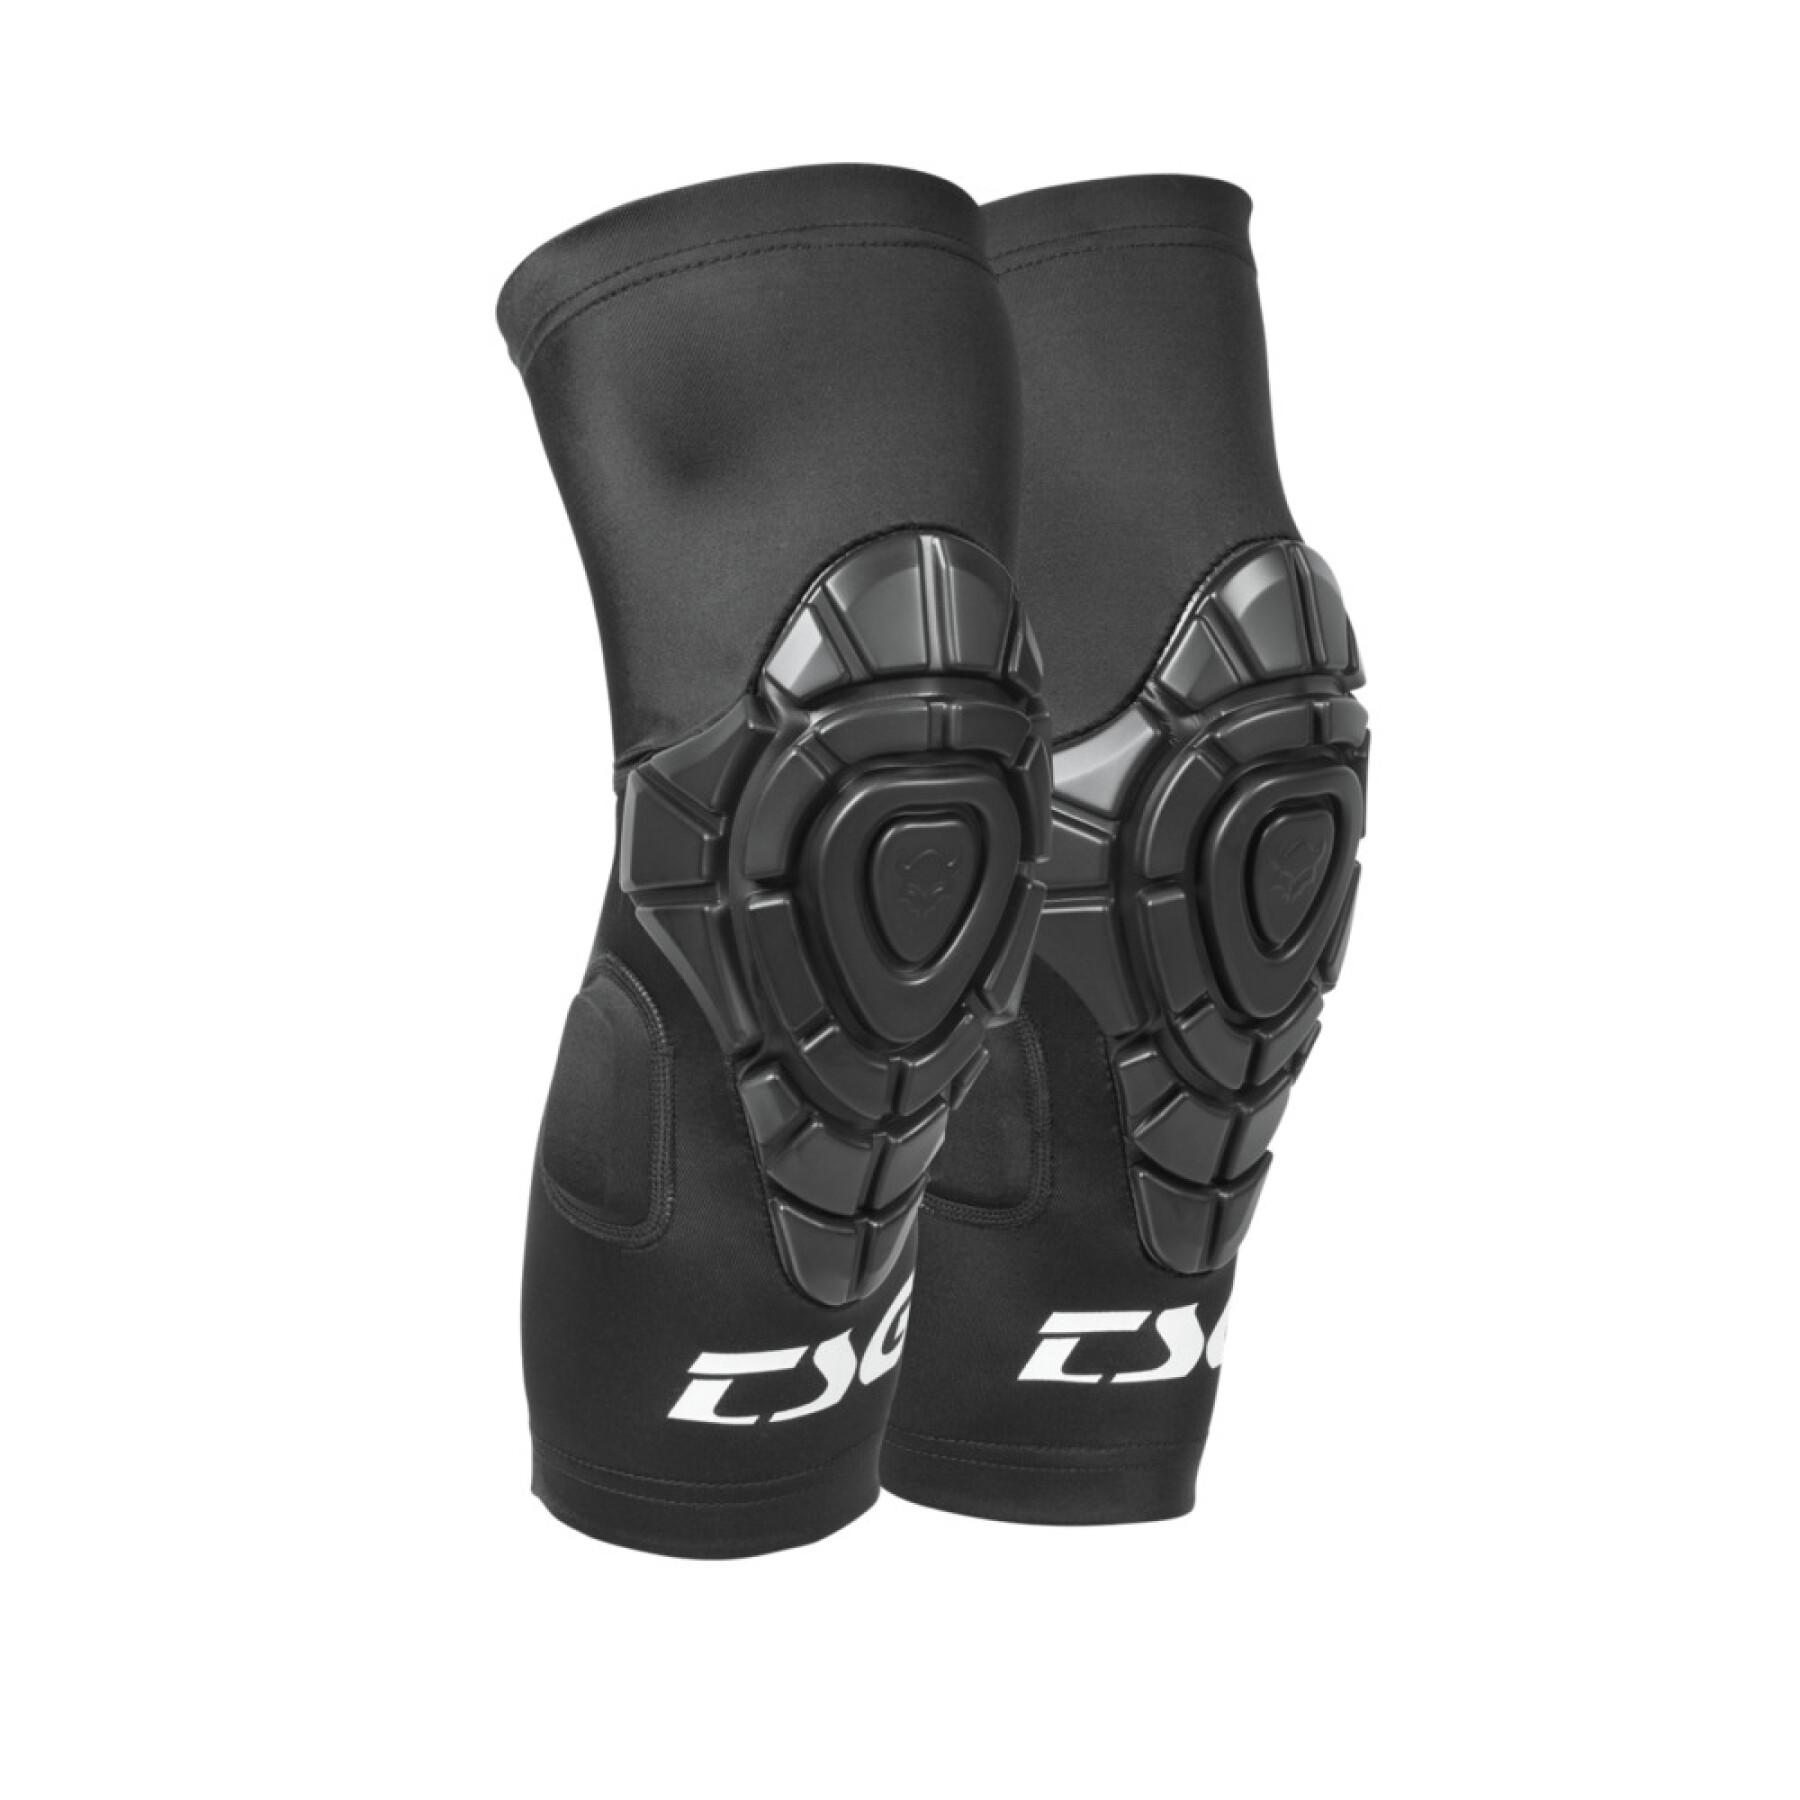 Knee protection for bicycles TSG Sleeve Joint